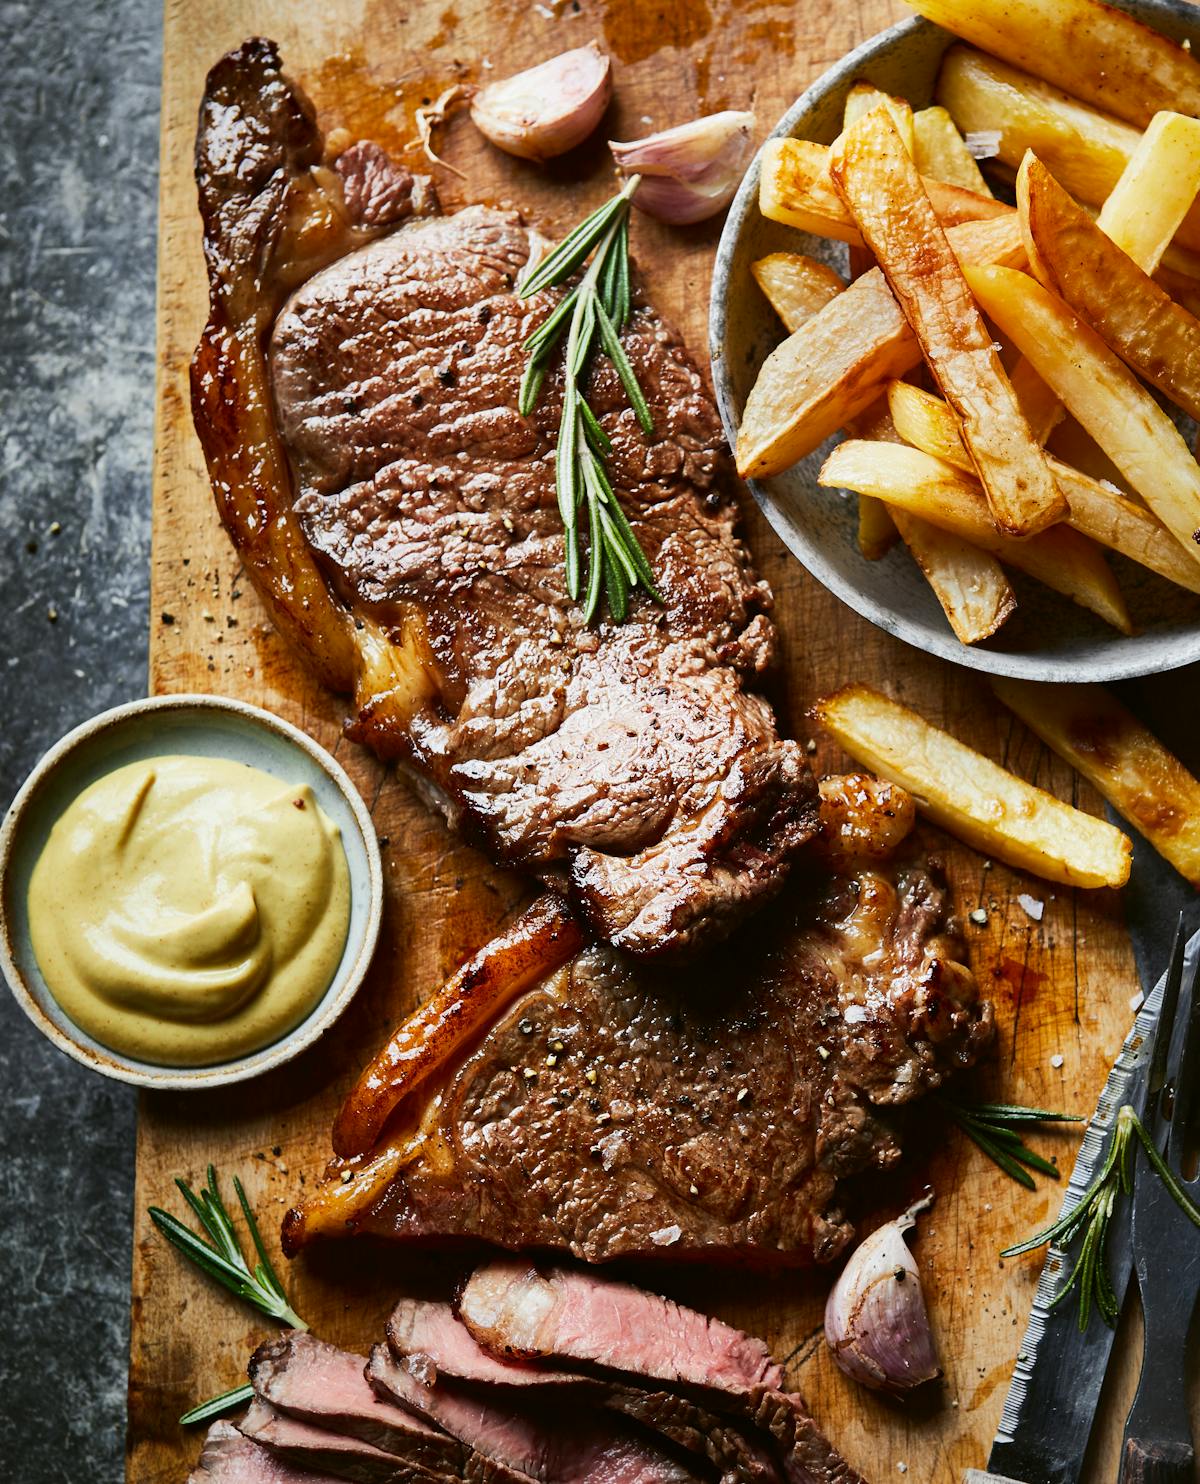 Steak, chips with garlic, and rosemary butter